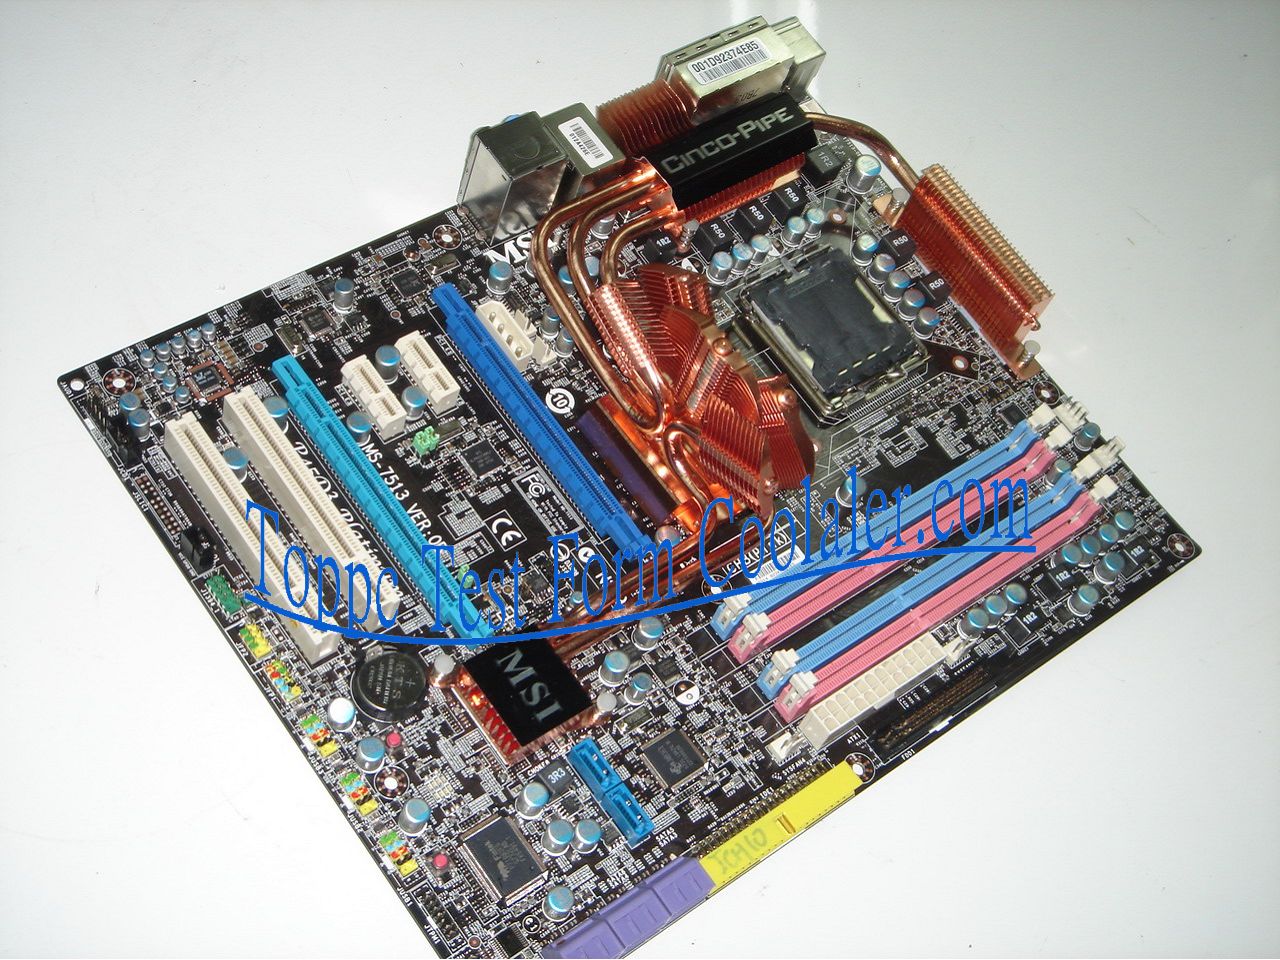 MSI P45D3 Platinum Cinco Pipe Motherboard Pictured | TechPowerUp Forums